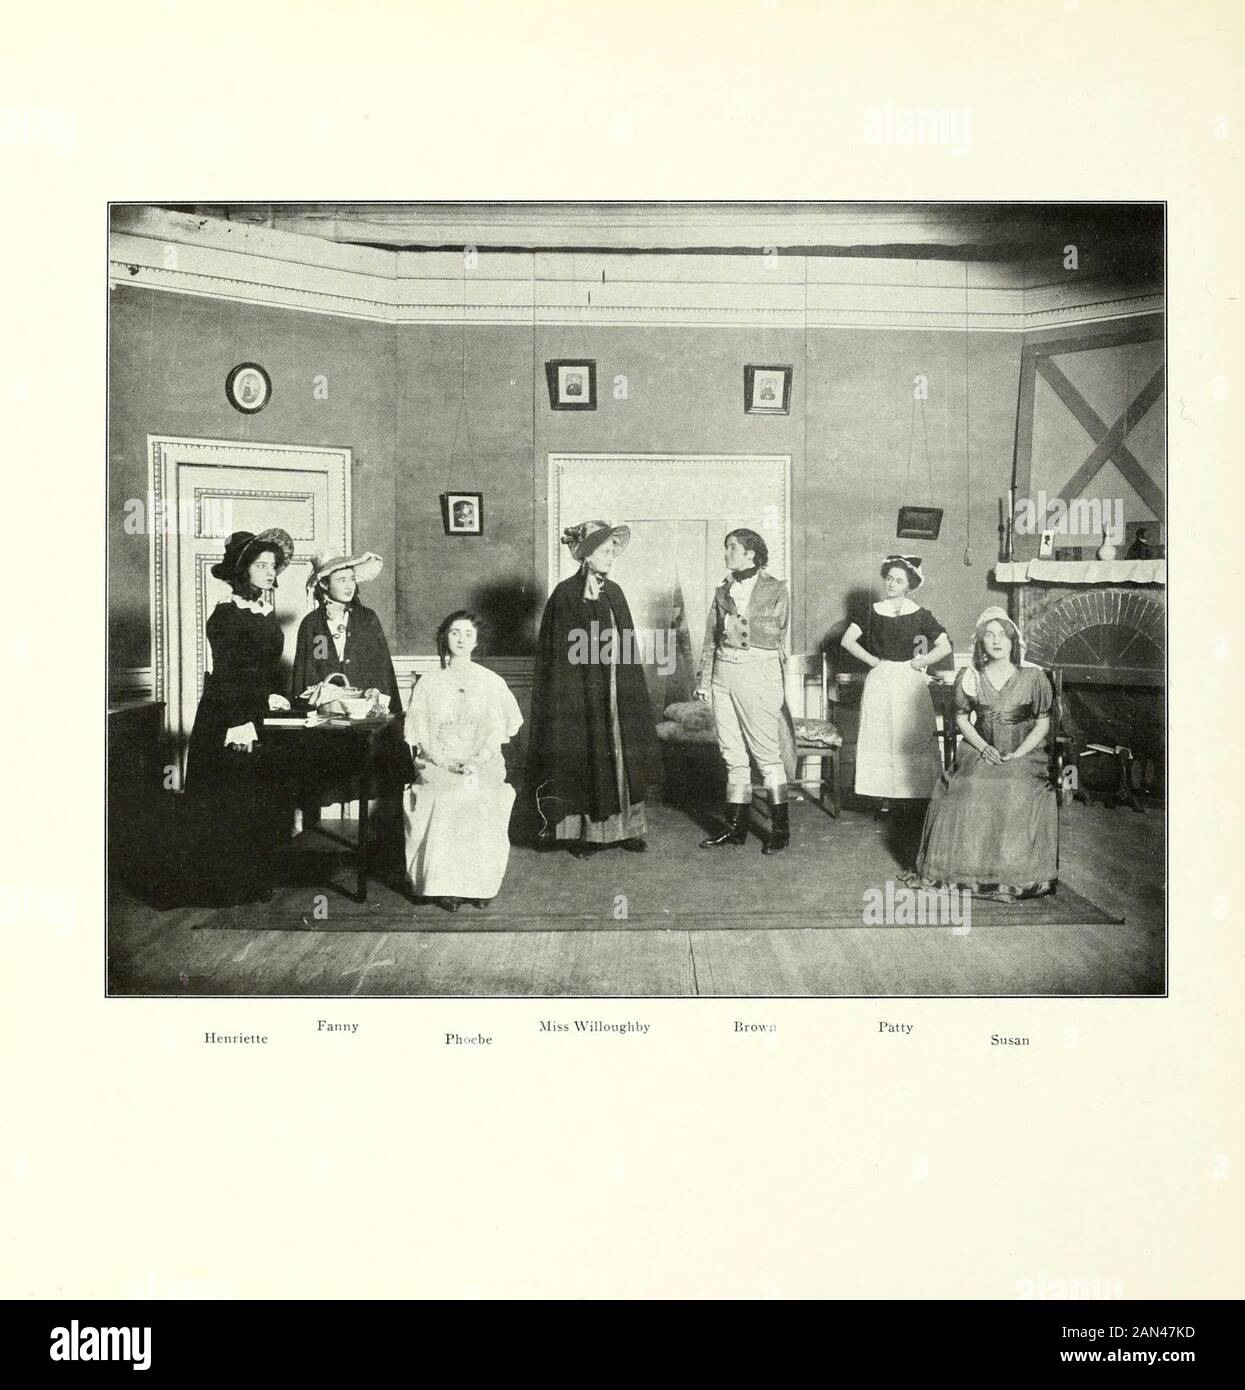 Mortarboard . E. Doty Clara de Foenix f Grandchildren ) Florence Van Vranken Miss Trafalgar Gower, Sir Williams Sister Ernestine Isabel Captain de Foenix, Claras Husband E. Franklin Mrs. Mossop, a Landlady Lucile Mordecai Mr. Ablett, a Grocer M. Coyle Charles, a Butler I. Glenn Sarah, a Maid Grace Greene The First Act at Mr. and Mrs. Telfers Lodgings in No. 2, Brydon Crescent, Clerkenwell. May.The Second Act at Sir William Growers, in Cavendish Square. June.The Third Act again in Brydon Crescent. December. The Fourth Act on the stage of the Pantheon Theatre. A few days later.Period somewhere i Stock Photo